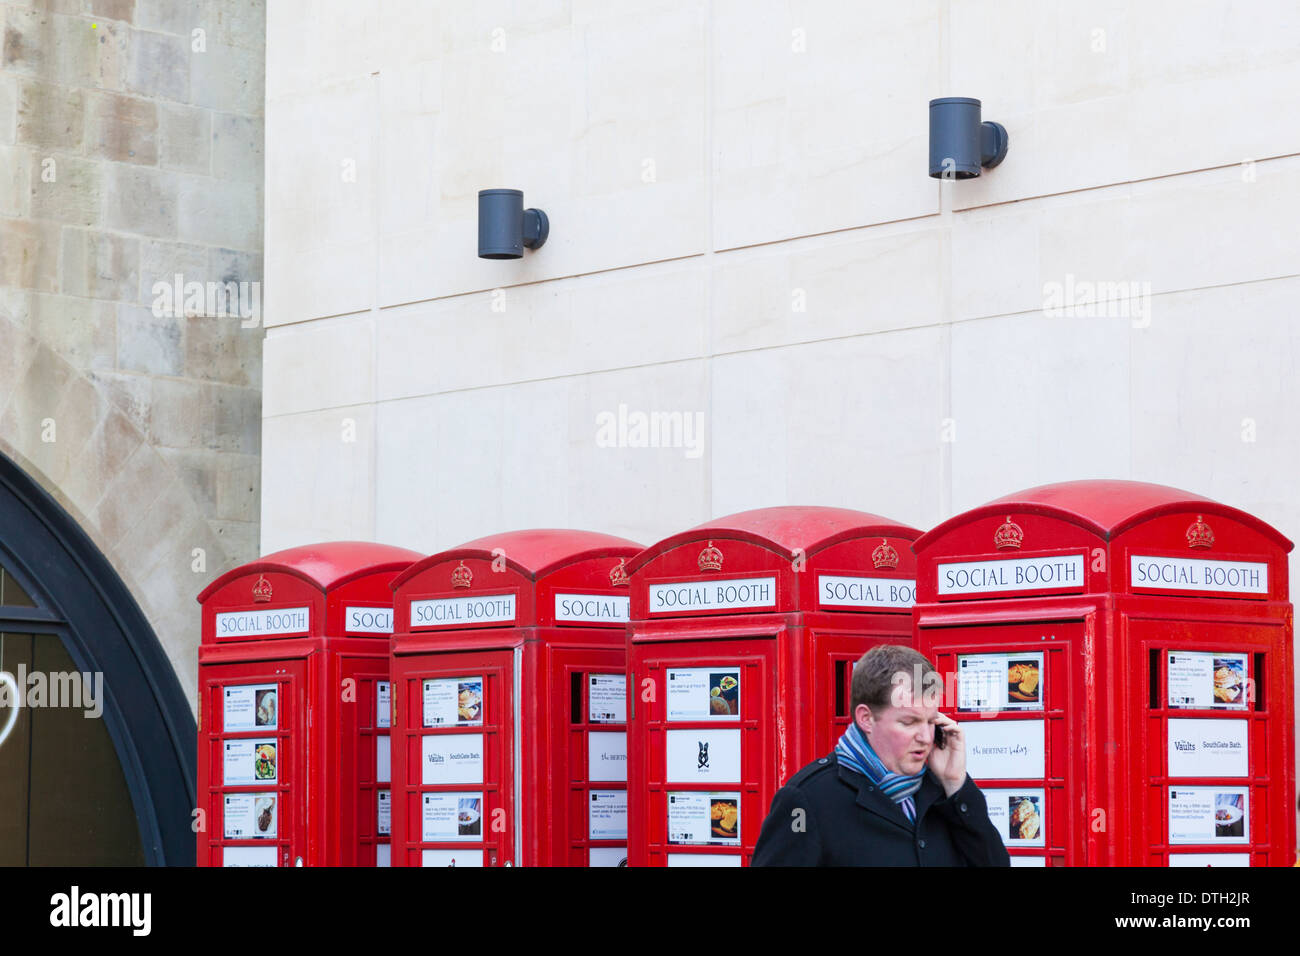 A man make a call on his mobile telephone in front of a row of dummy iconic red telephone boxes. Stock Photo